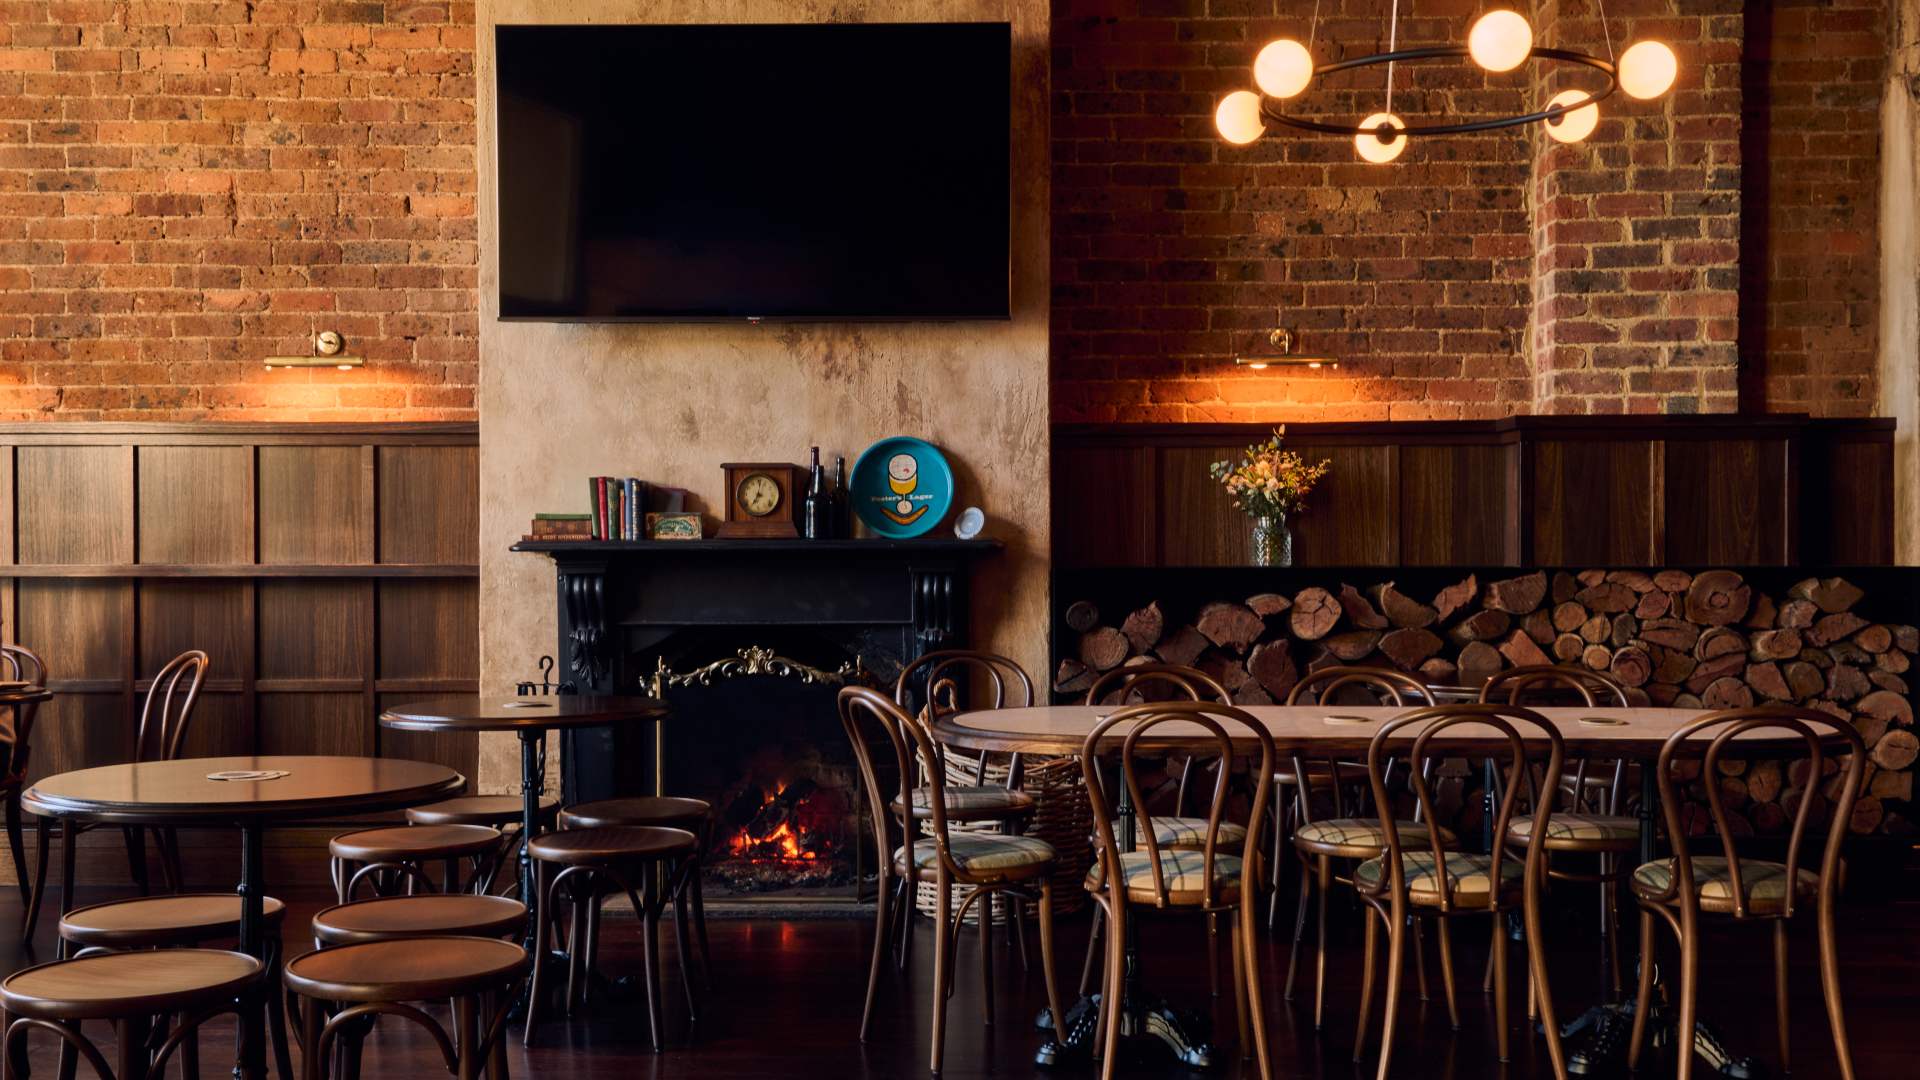 Mornington's Newly Restored Bay Hotel Is Now a Stunning All-Rounder for Gigs, Pints and Pub Grub